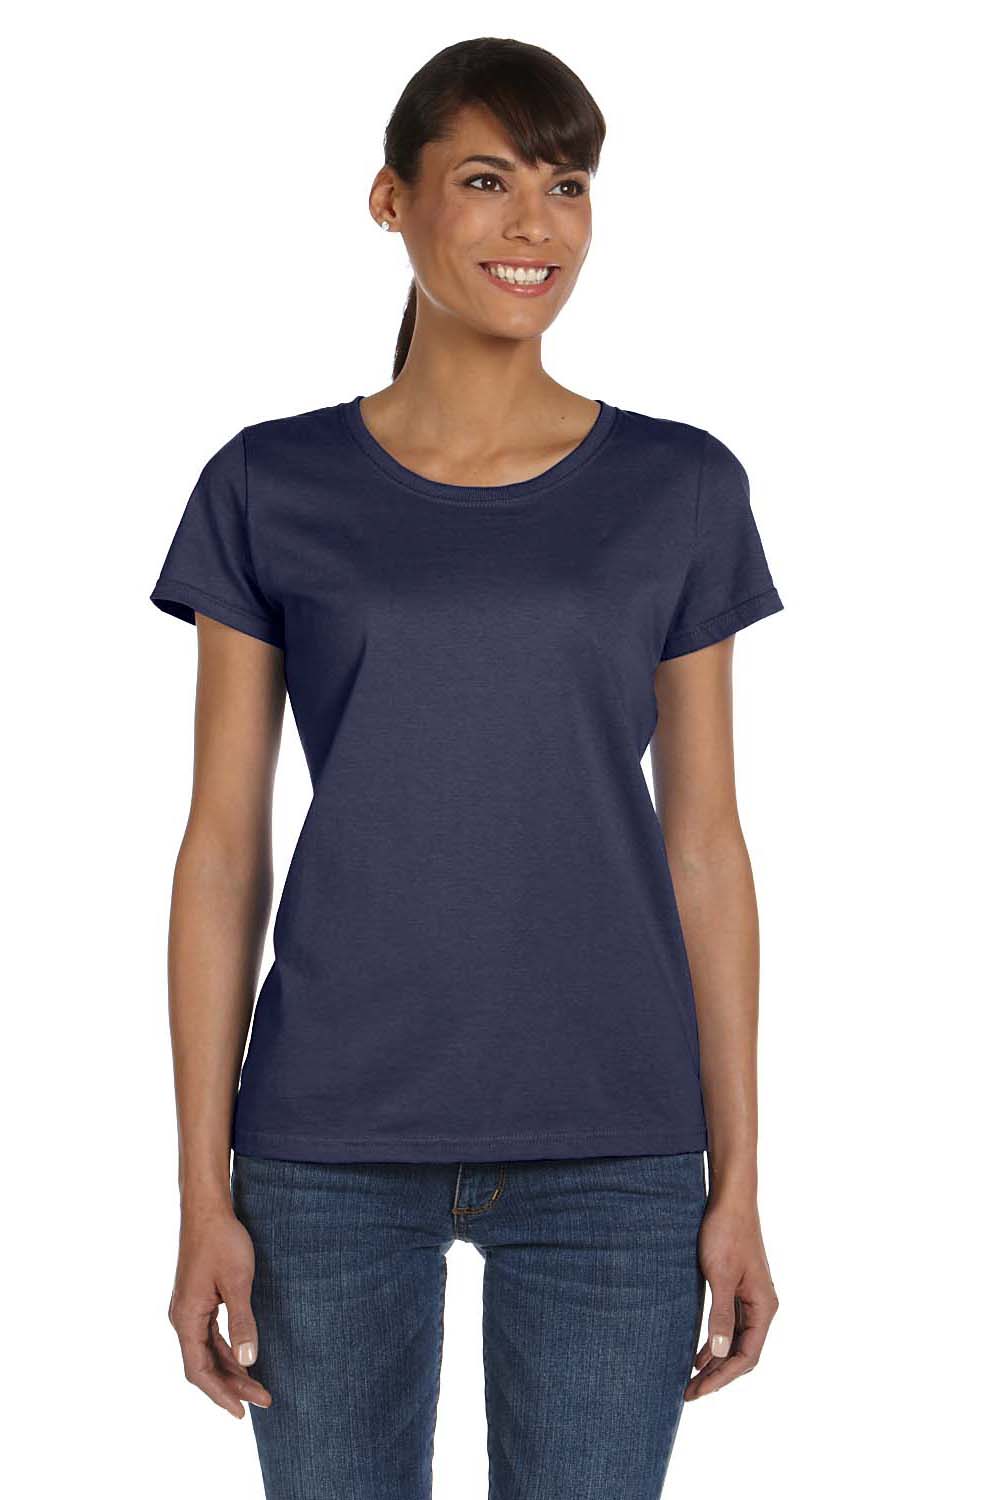 Fruit Of The Loom L3930R Womens HD Jersey Short Sleeve Crewneck T-Shirt Navy Blue Front